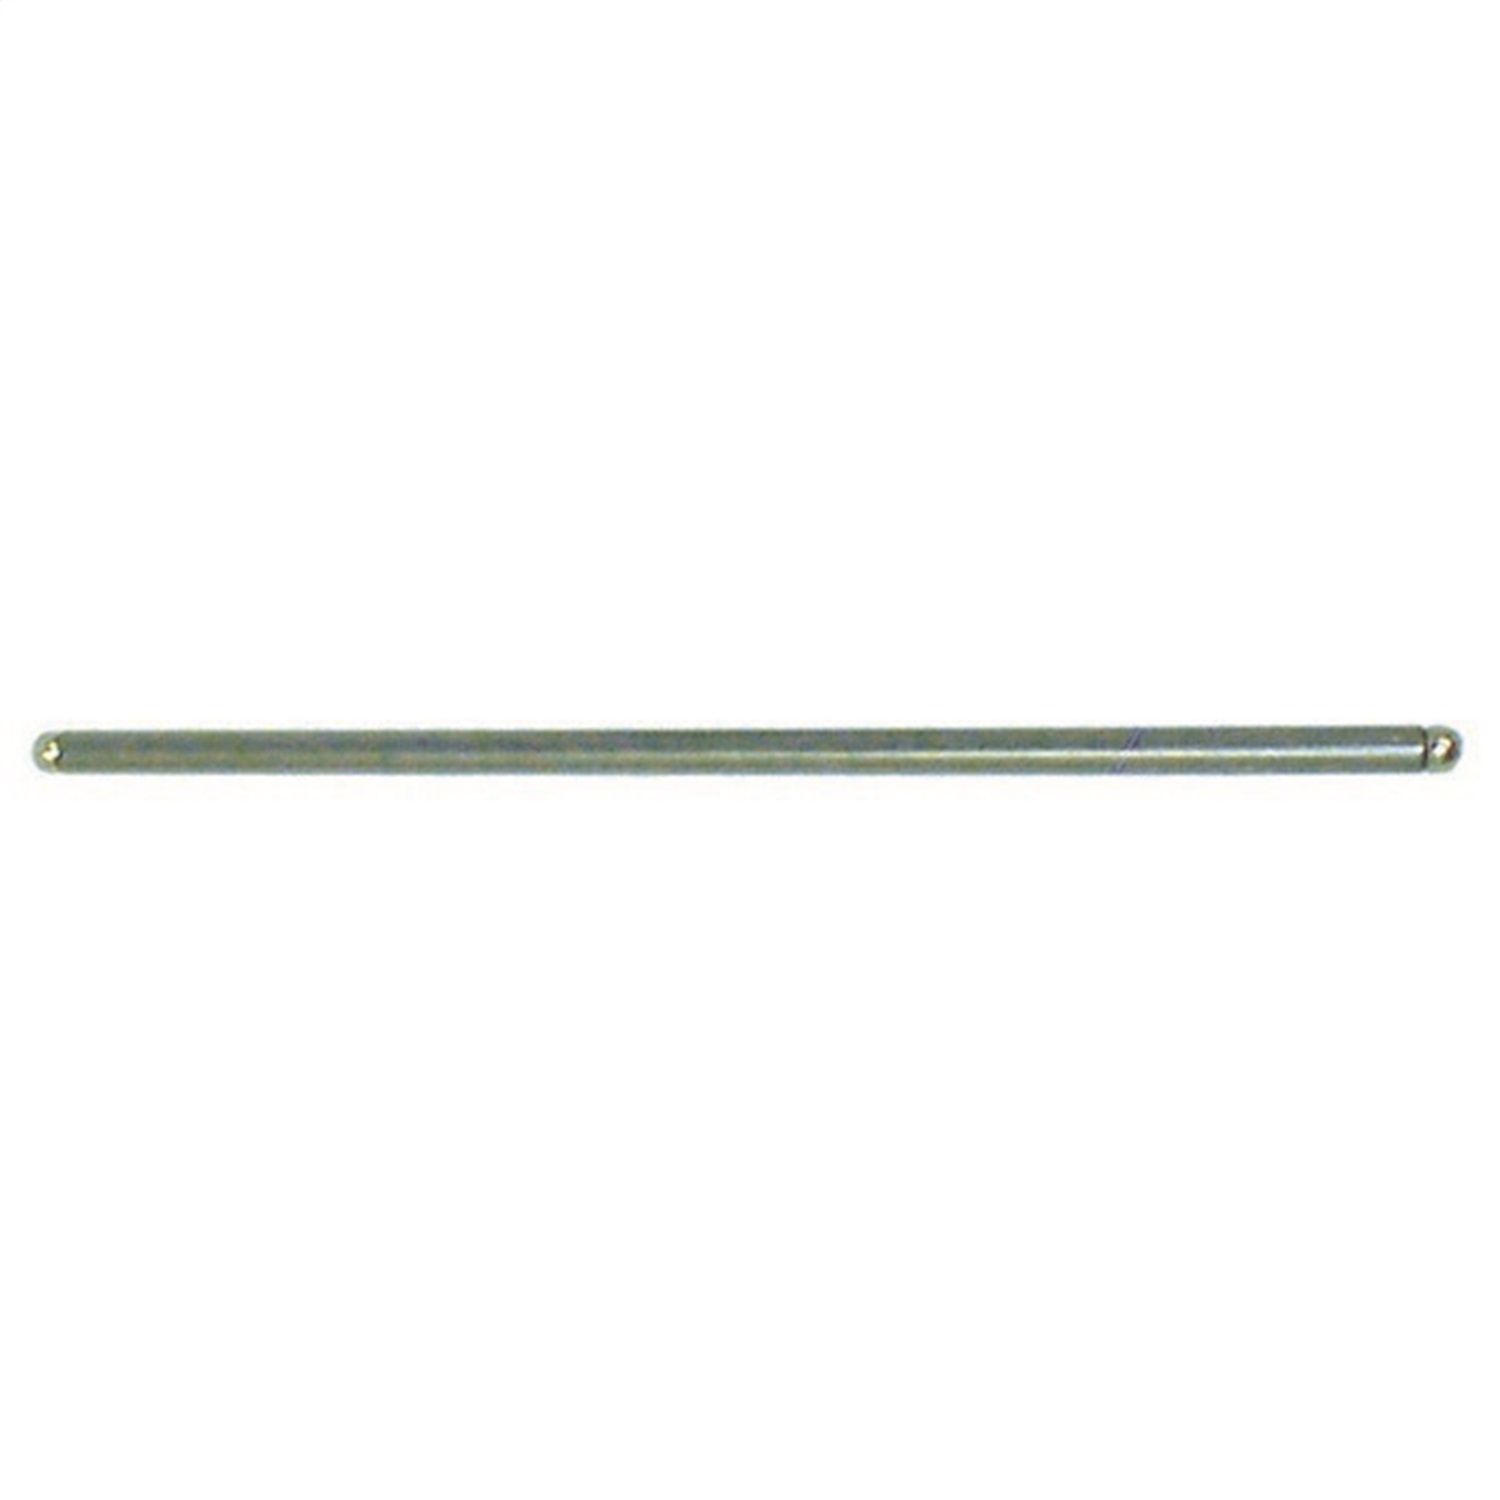 Omix Push Rod 4.2L 1981-1990 Jeep Cj And Wrangler By Omix, BKGF-17410.04